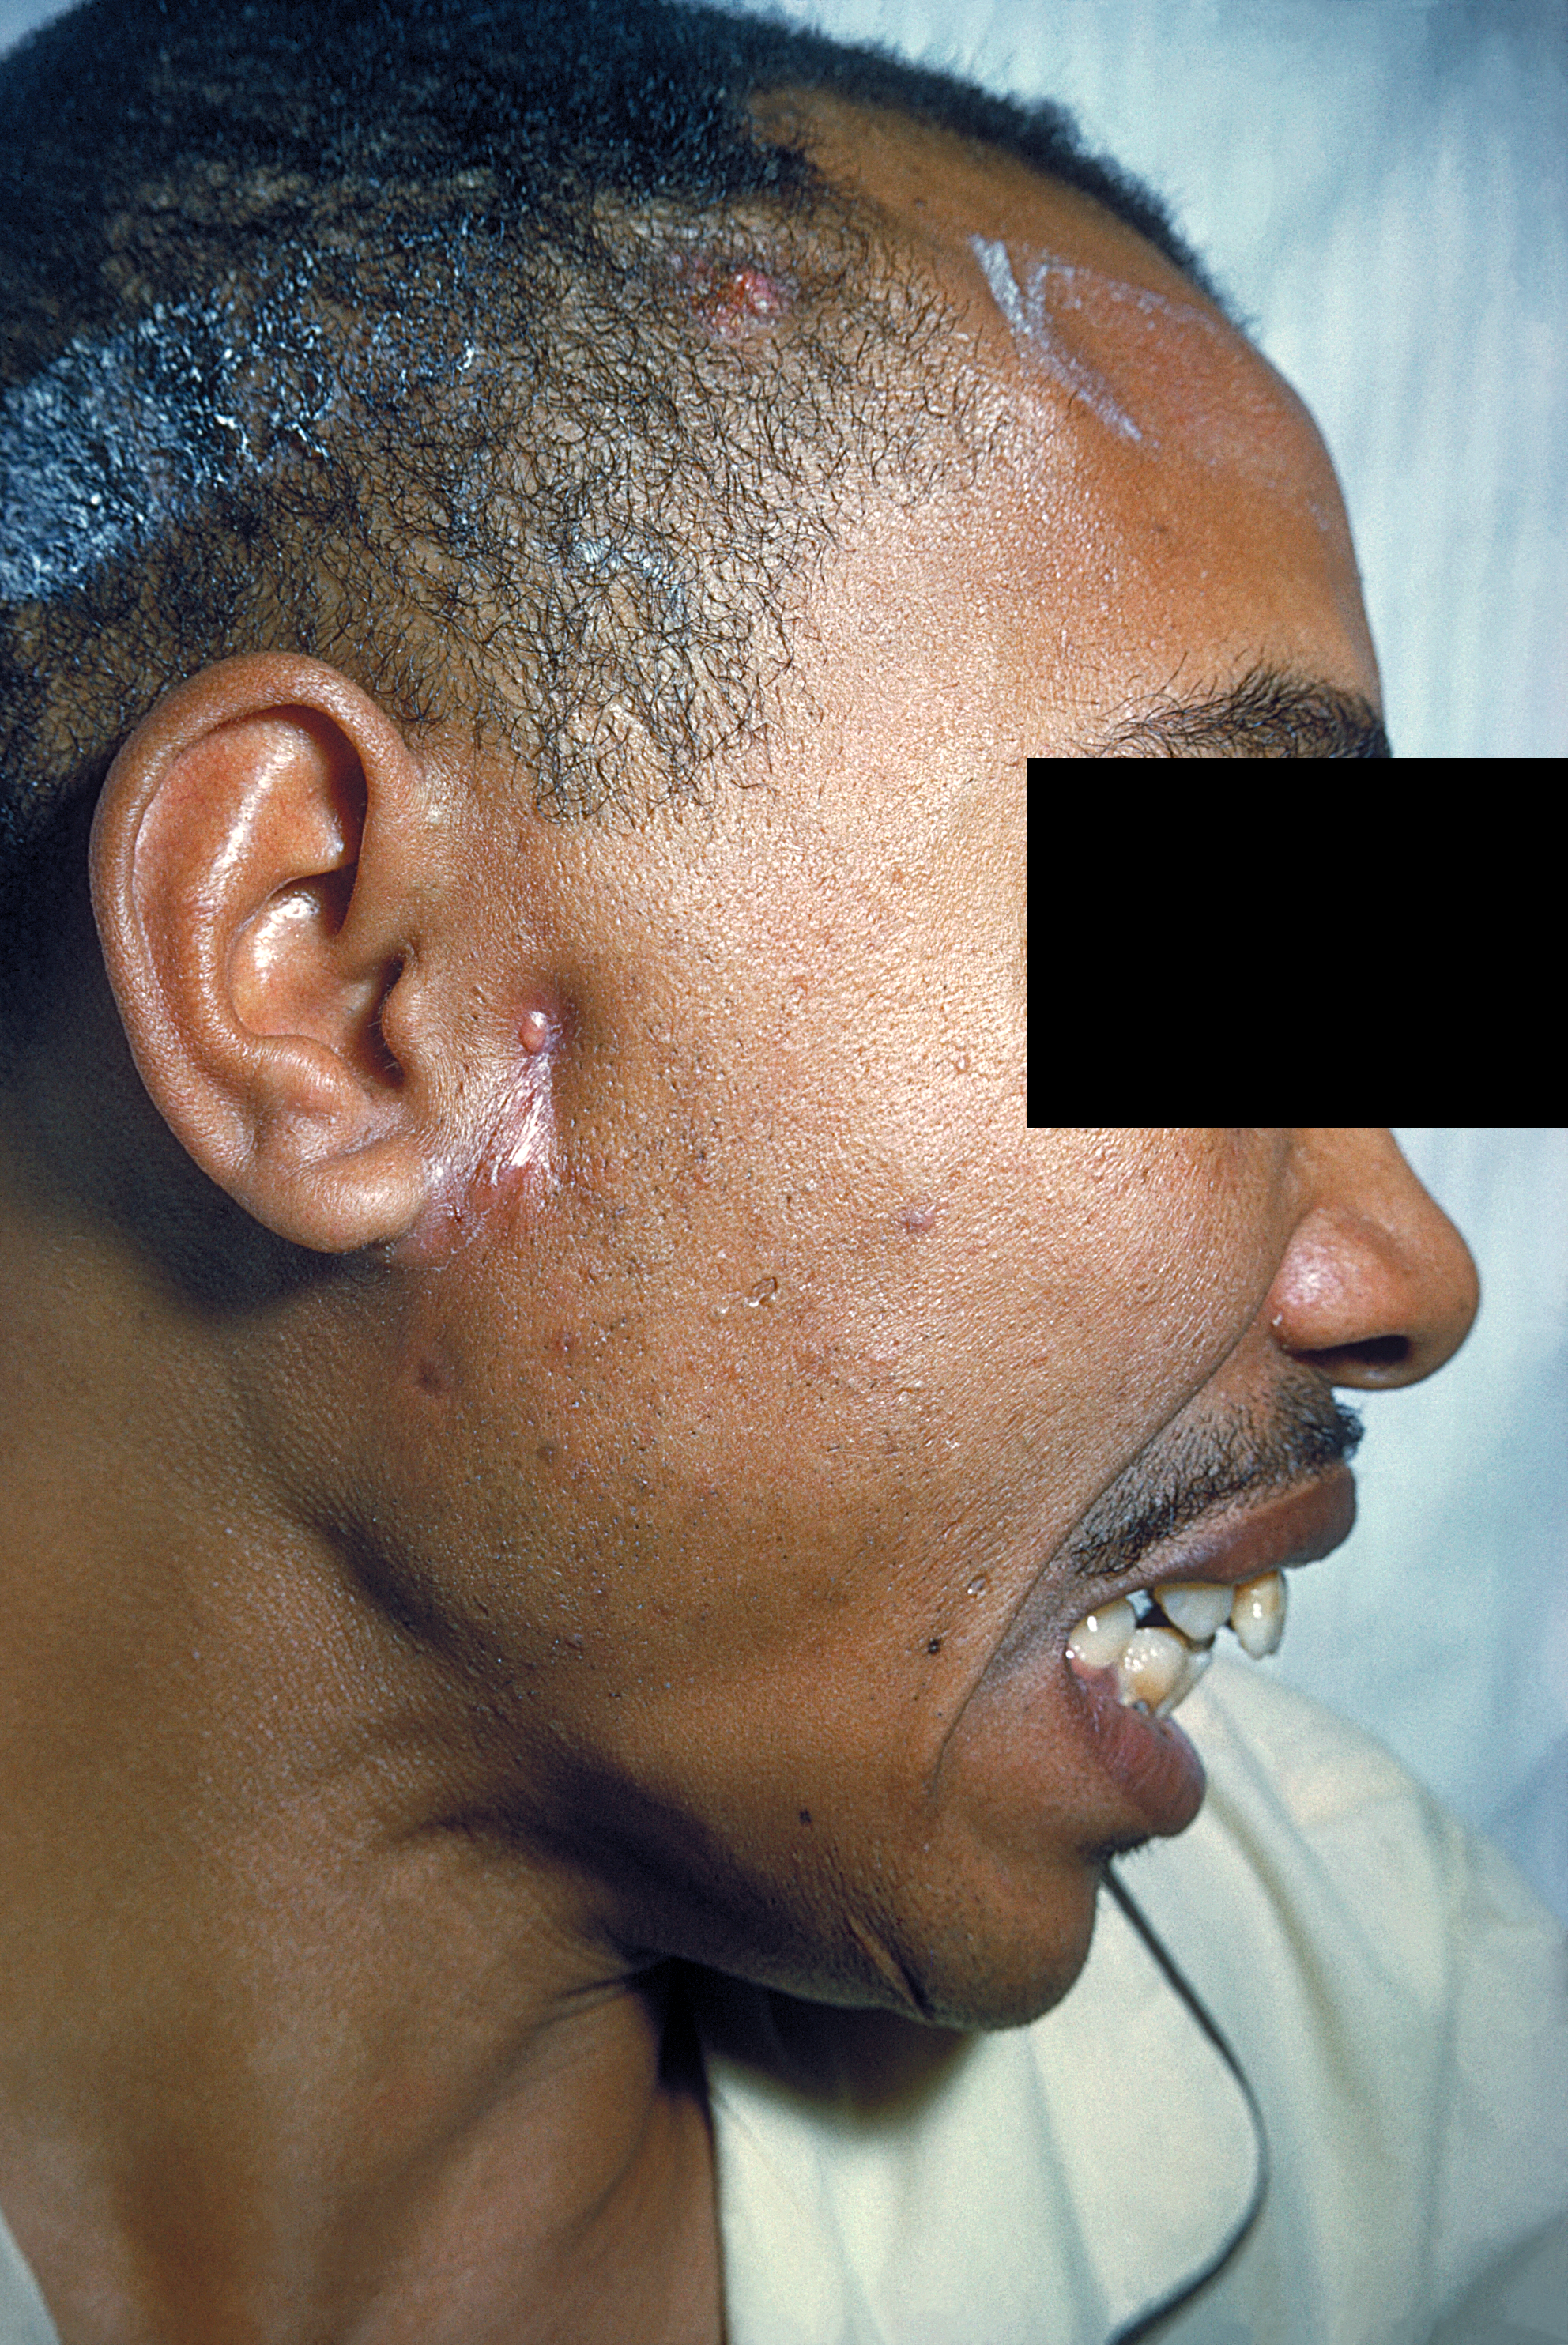 This image depicts a right lateral view of a patient’s head and neck, revealing a cutaneous lesion, just anterior to the right ear, which was determined to be a case of actinomycosis